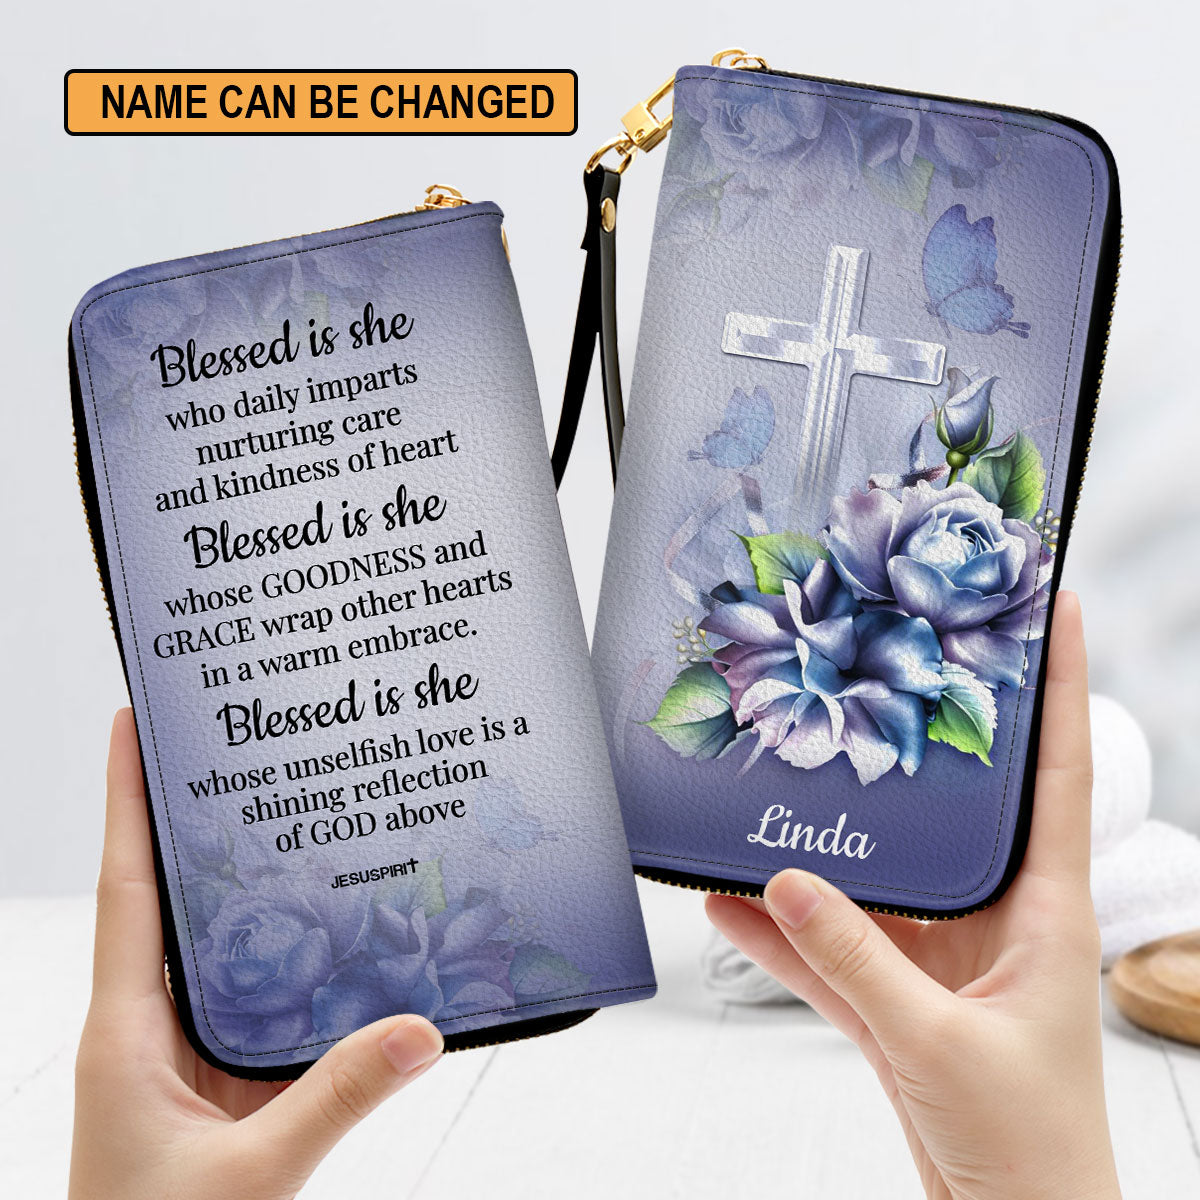 Blessed Is The Woman Who Trusts In The Lord - Beautiful Personalized S -  Jesuspirit